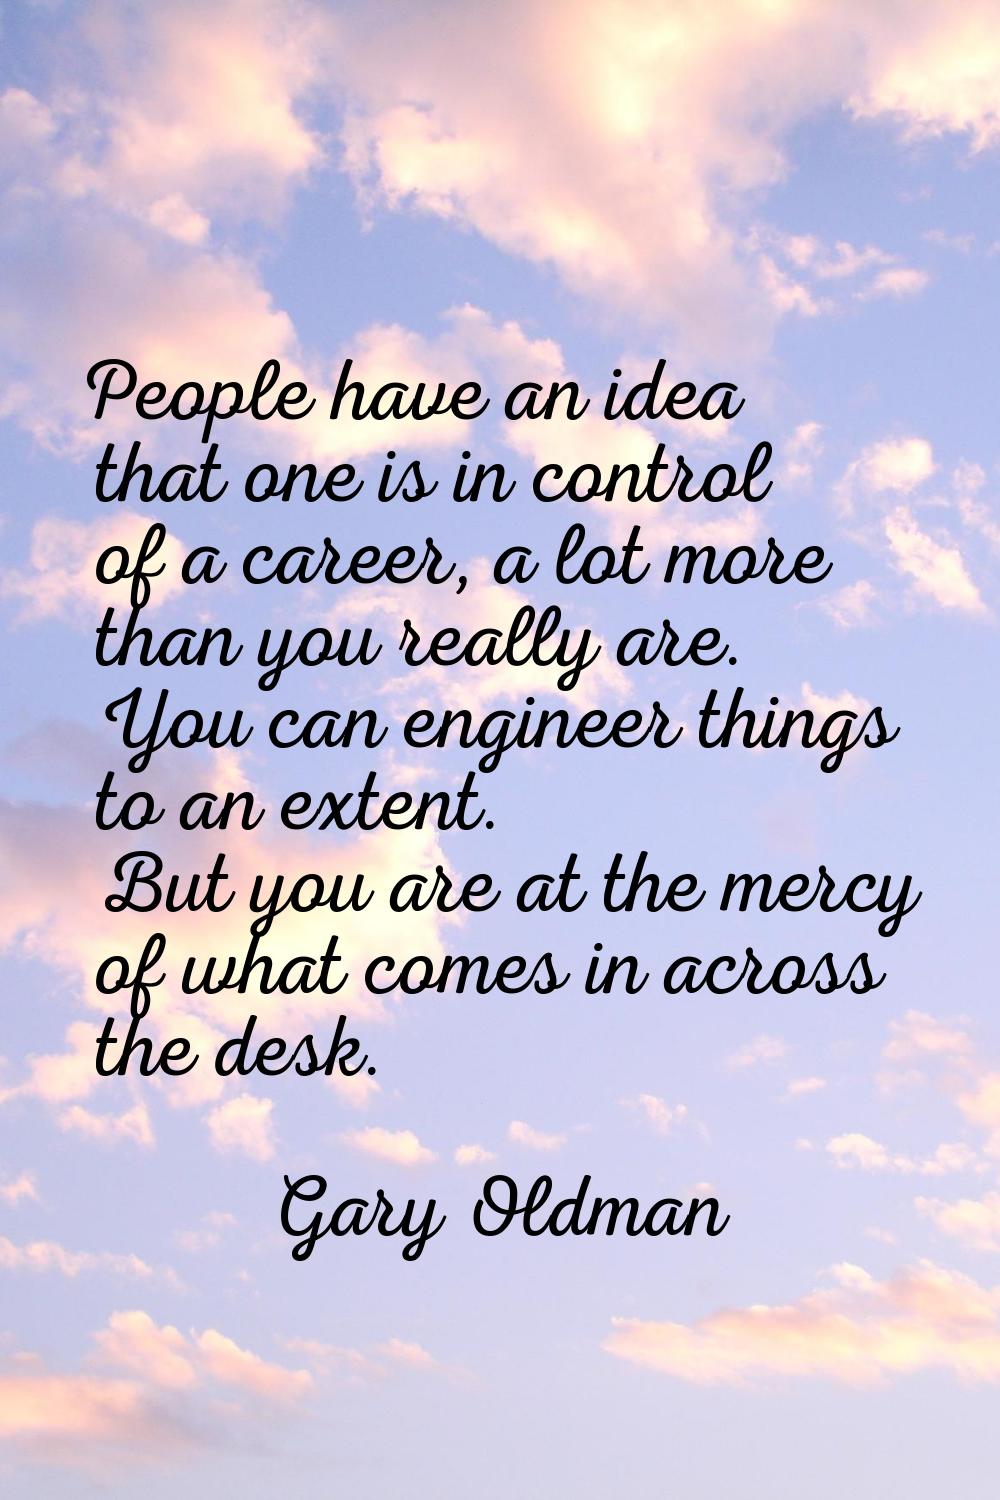 People have an idea that one is in control of a career, a lot more than you really are. You can eng